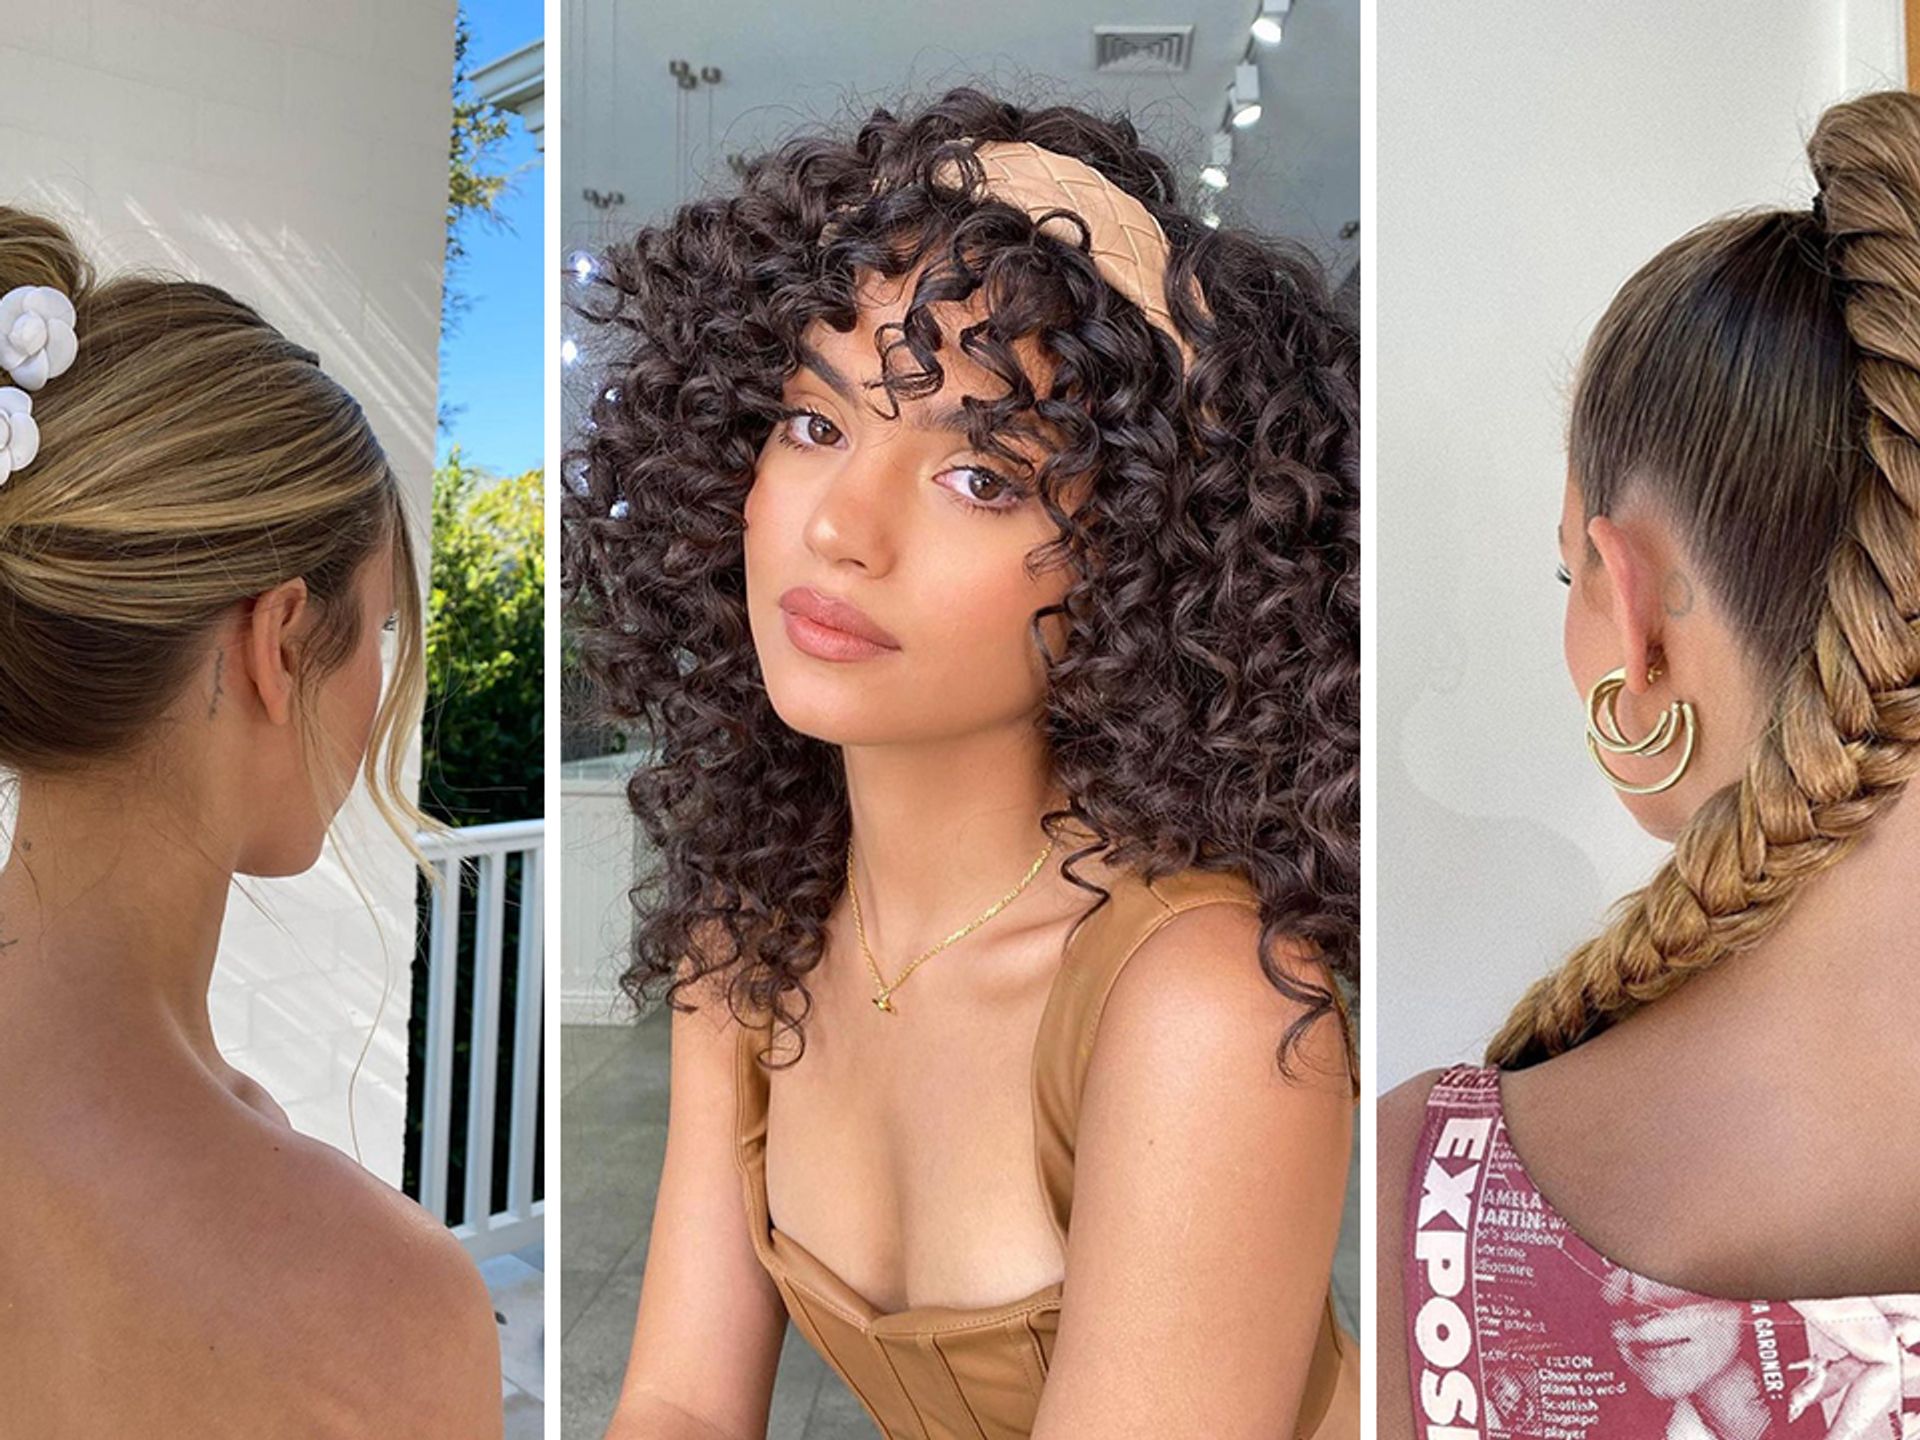 5 Cute Summer Hairstyles We Love 2018 - Best Summer Haircuts and Styles